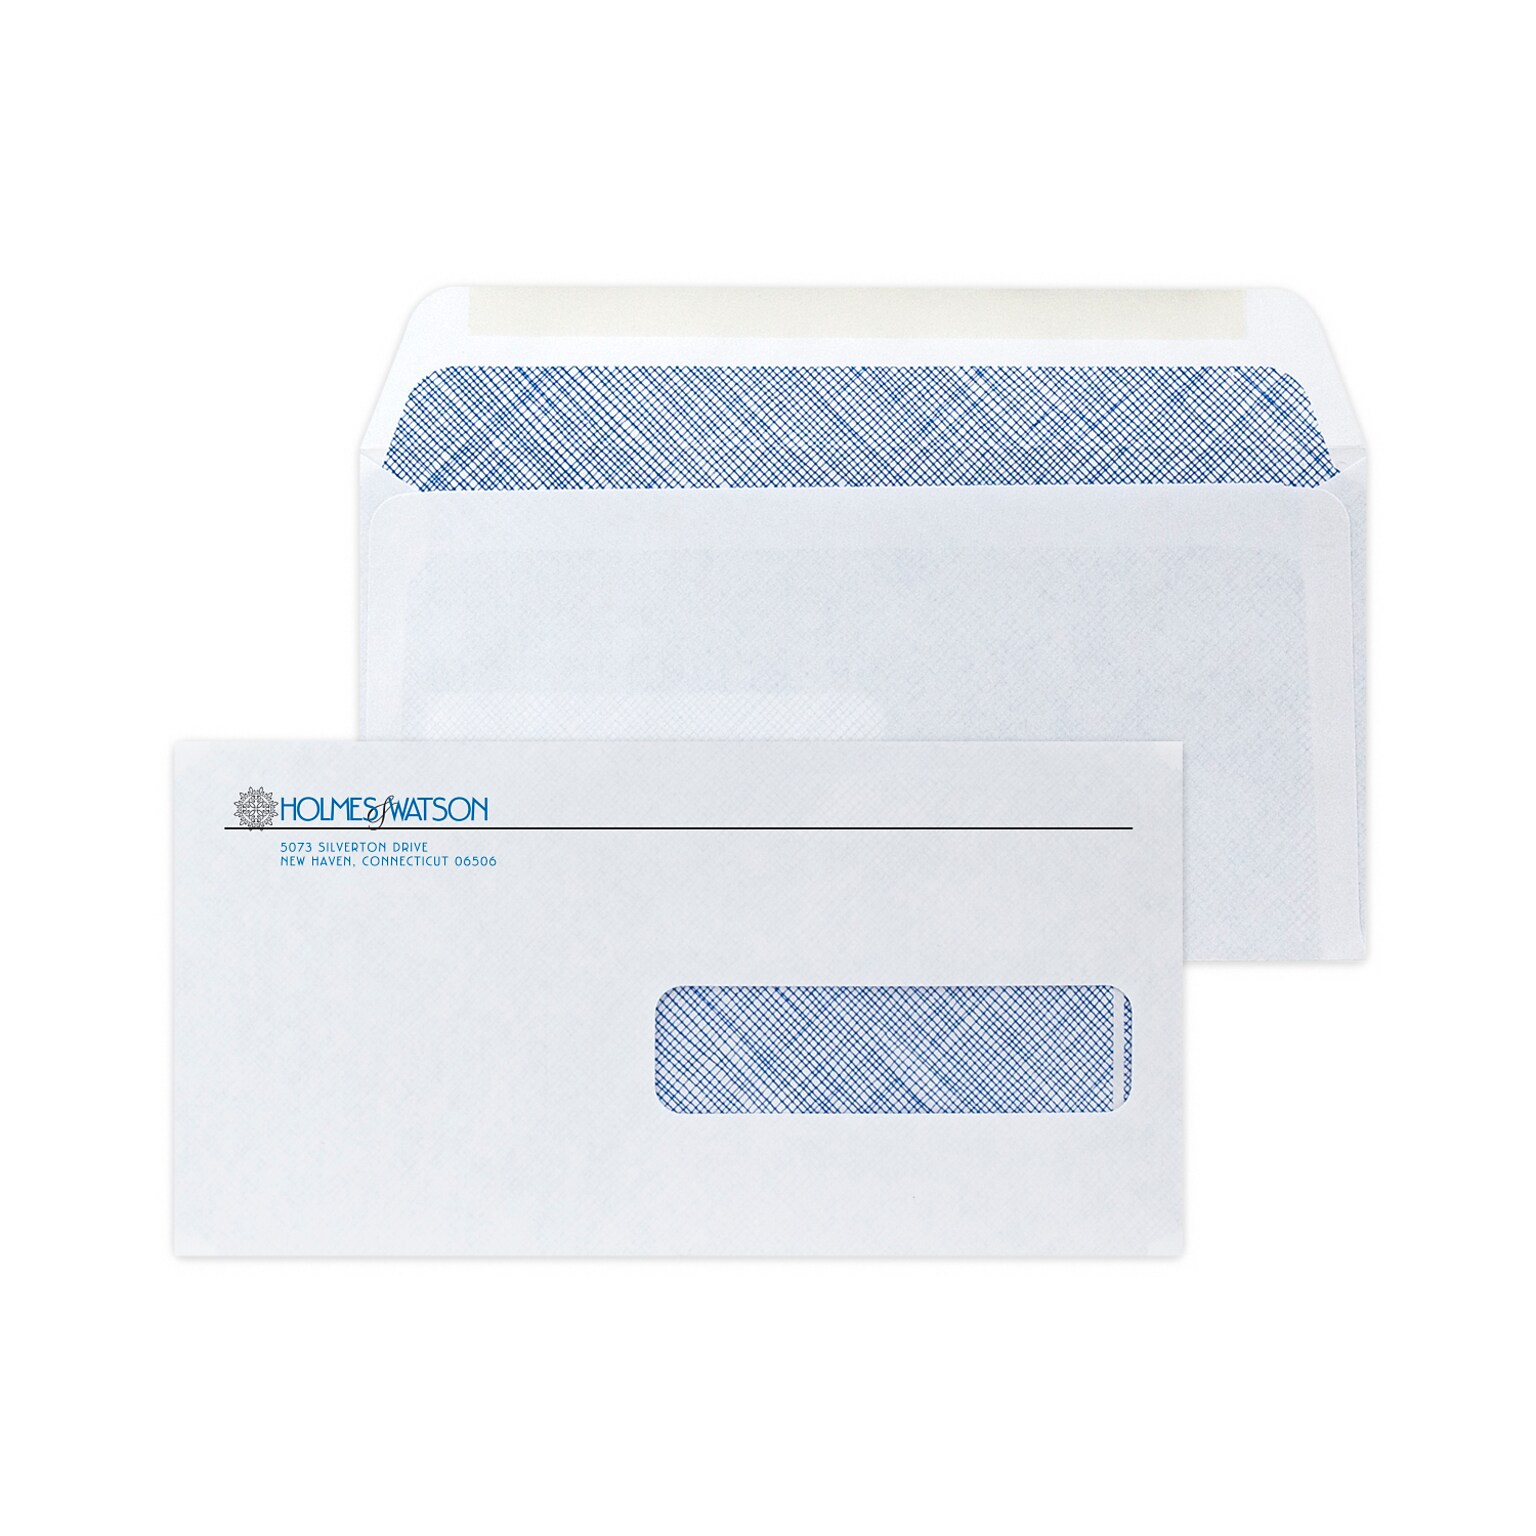 Custom 4-1/2 x 9 Insurance Claim Right Window Standard Envelopes with Security Tint, 24# White Wove, 2 Standard Inks, 250/Pack